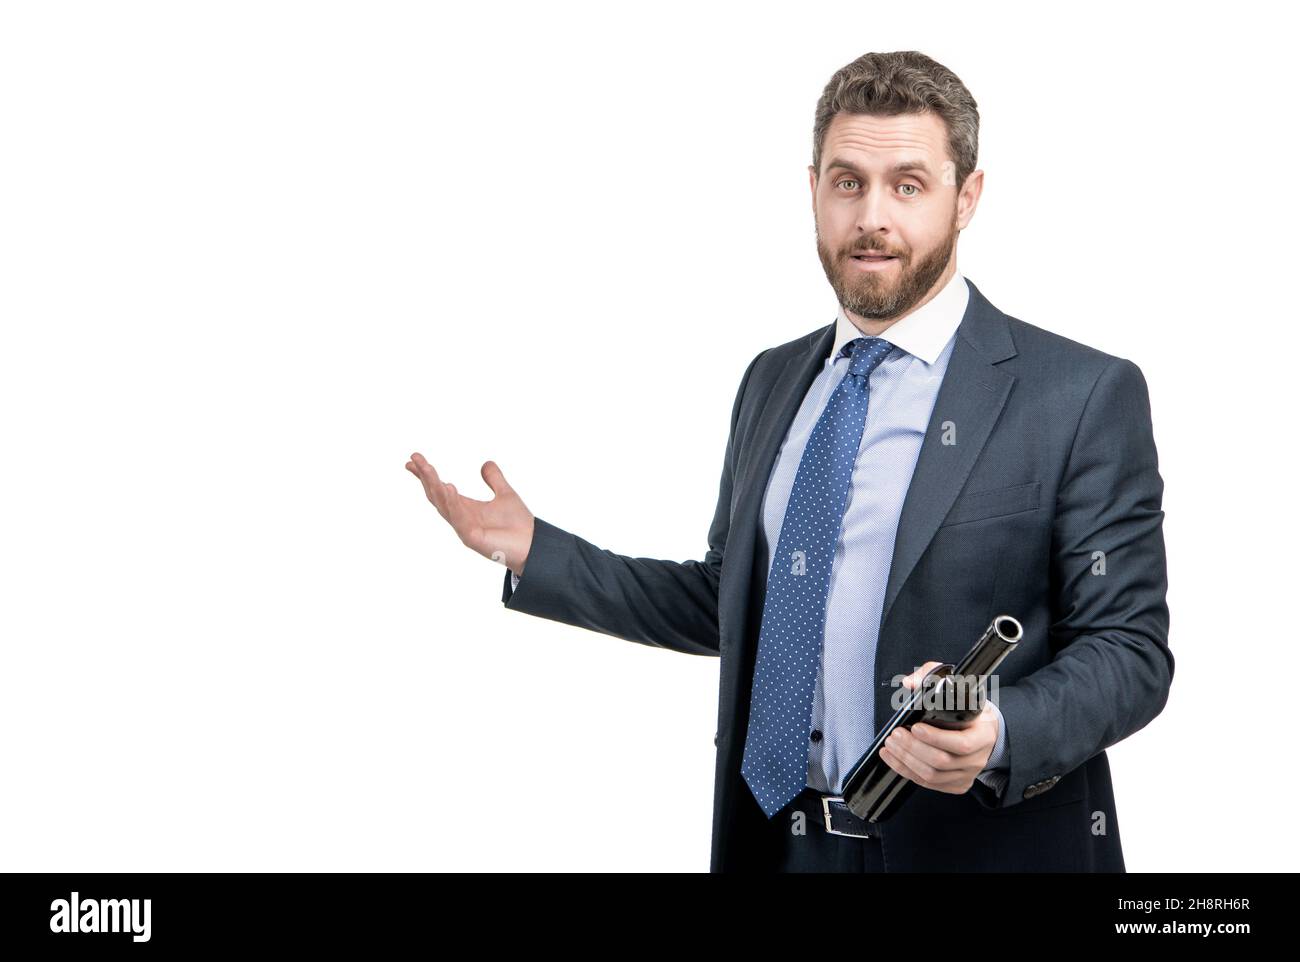 Drunk employee man in formal suit drink wine alcohol after work, drinking Stock Photo